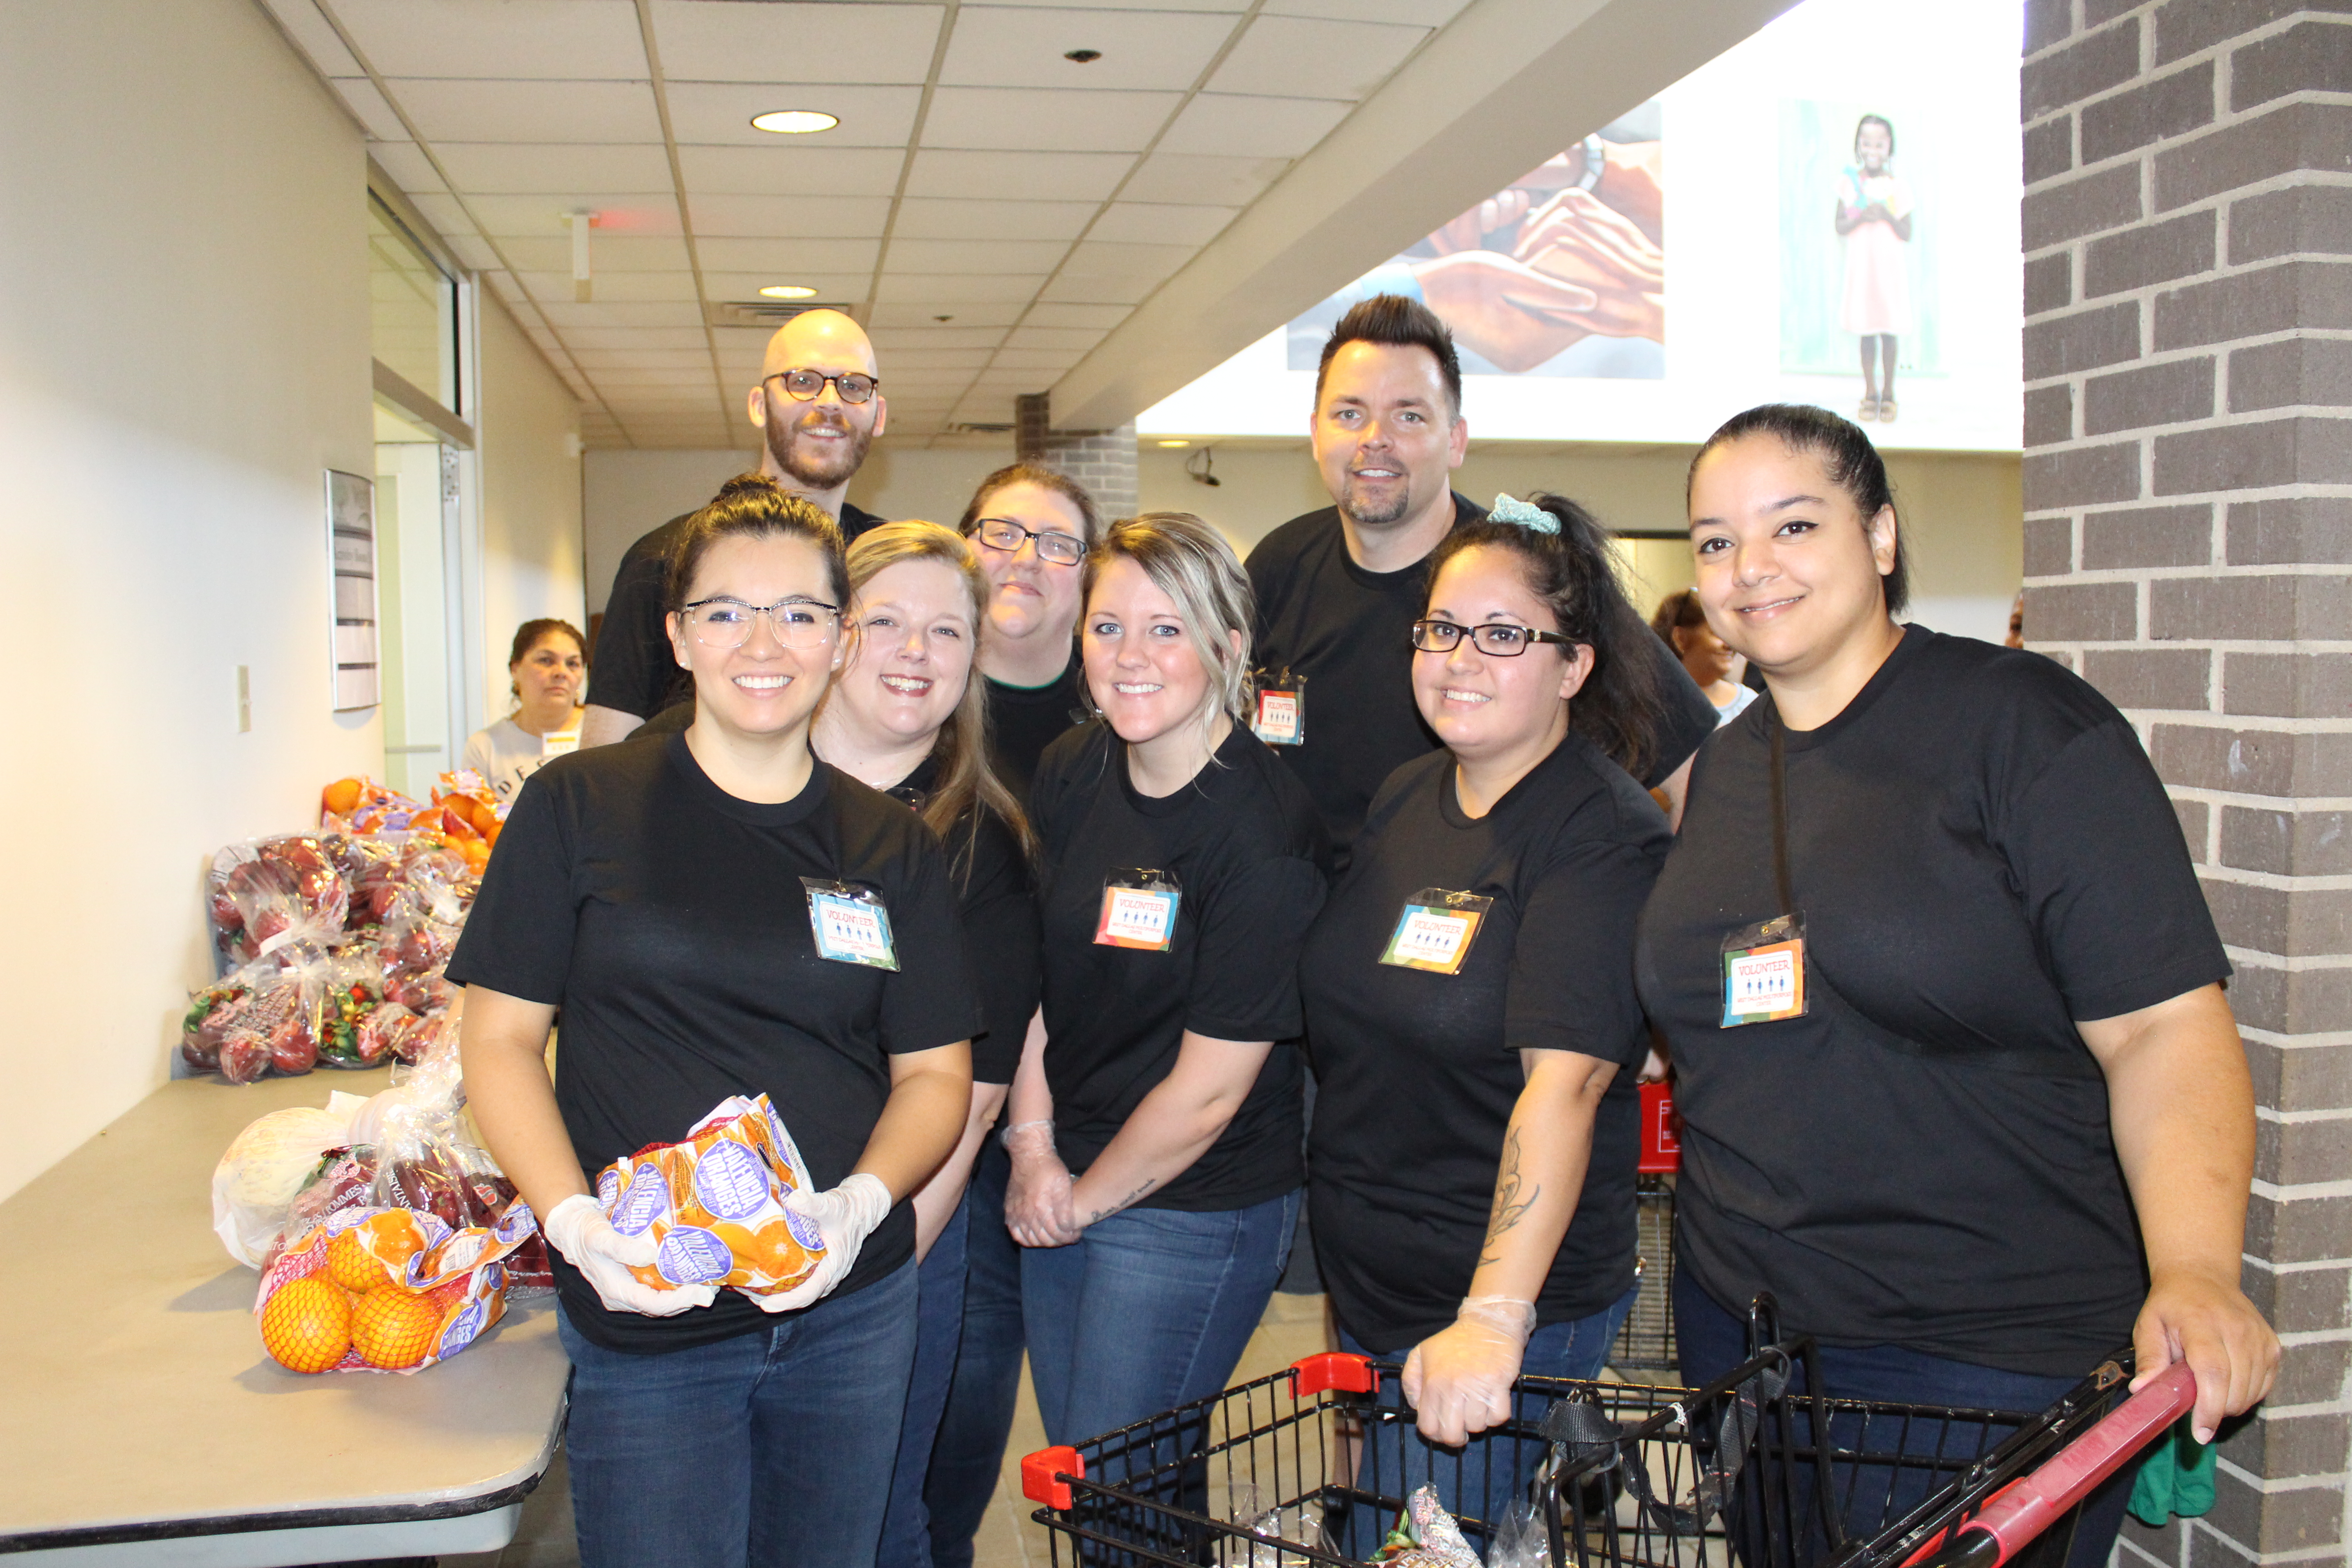 Starbucks employees volunteering at a Mobile Pantry Distribution in September 2019 in honor of Hunger Action Month. The recent grant Starbucks gave will support the Mobile Pantry Program in the North Texas Area.